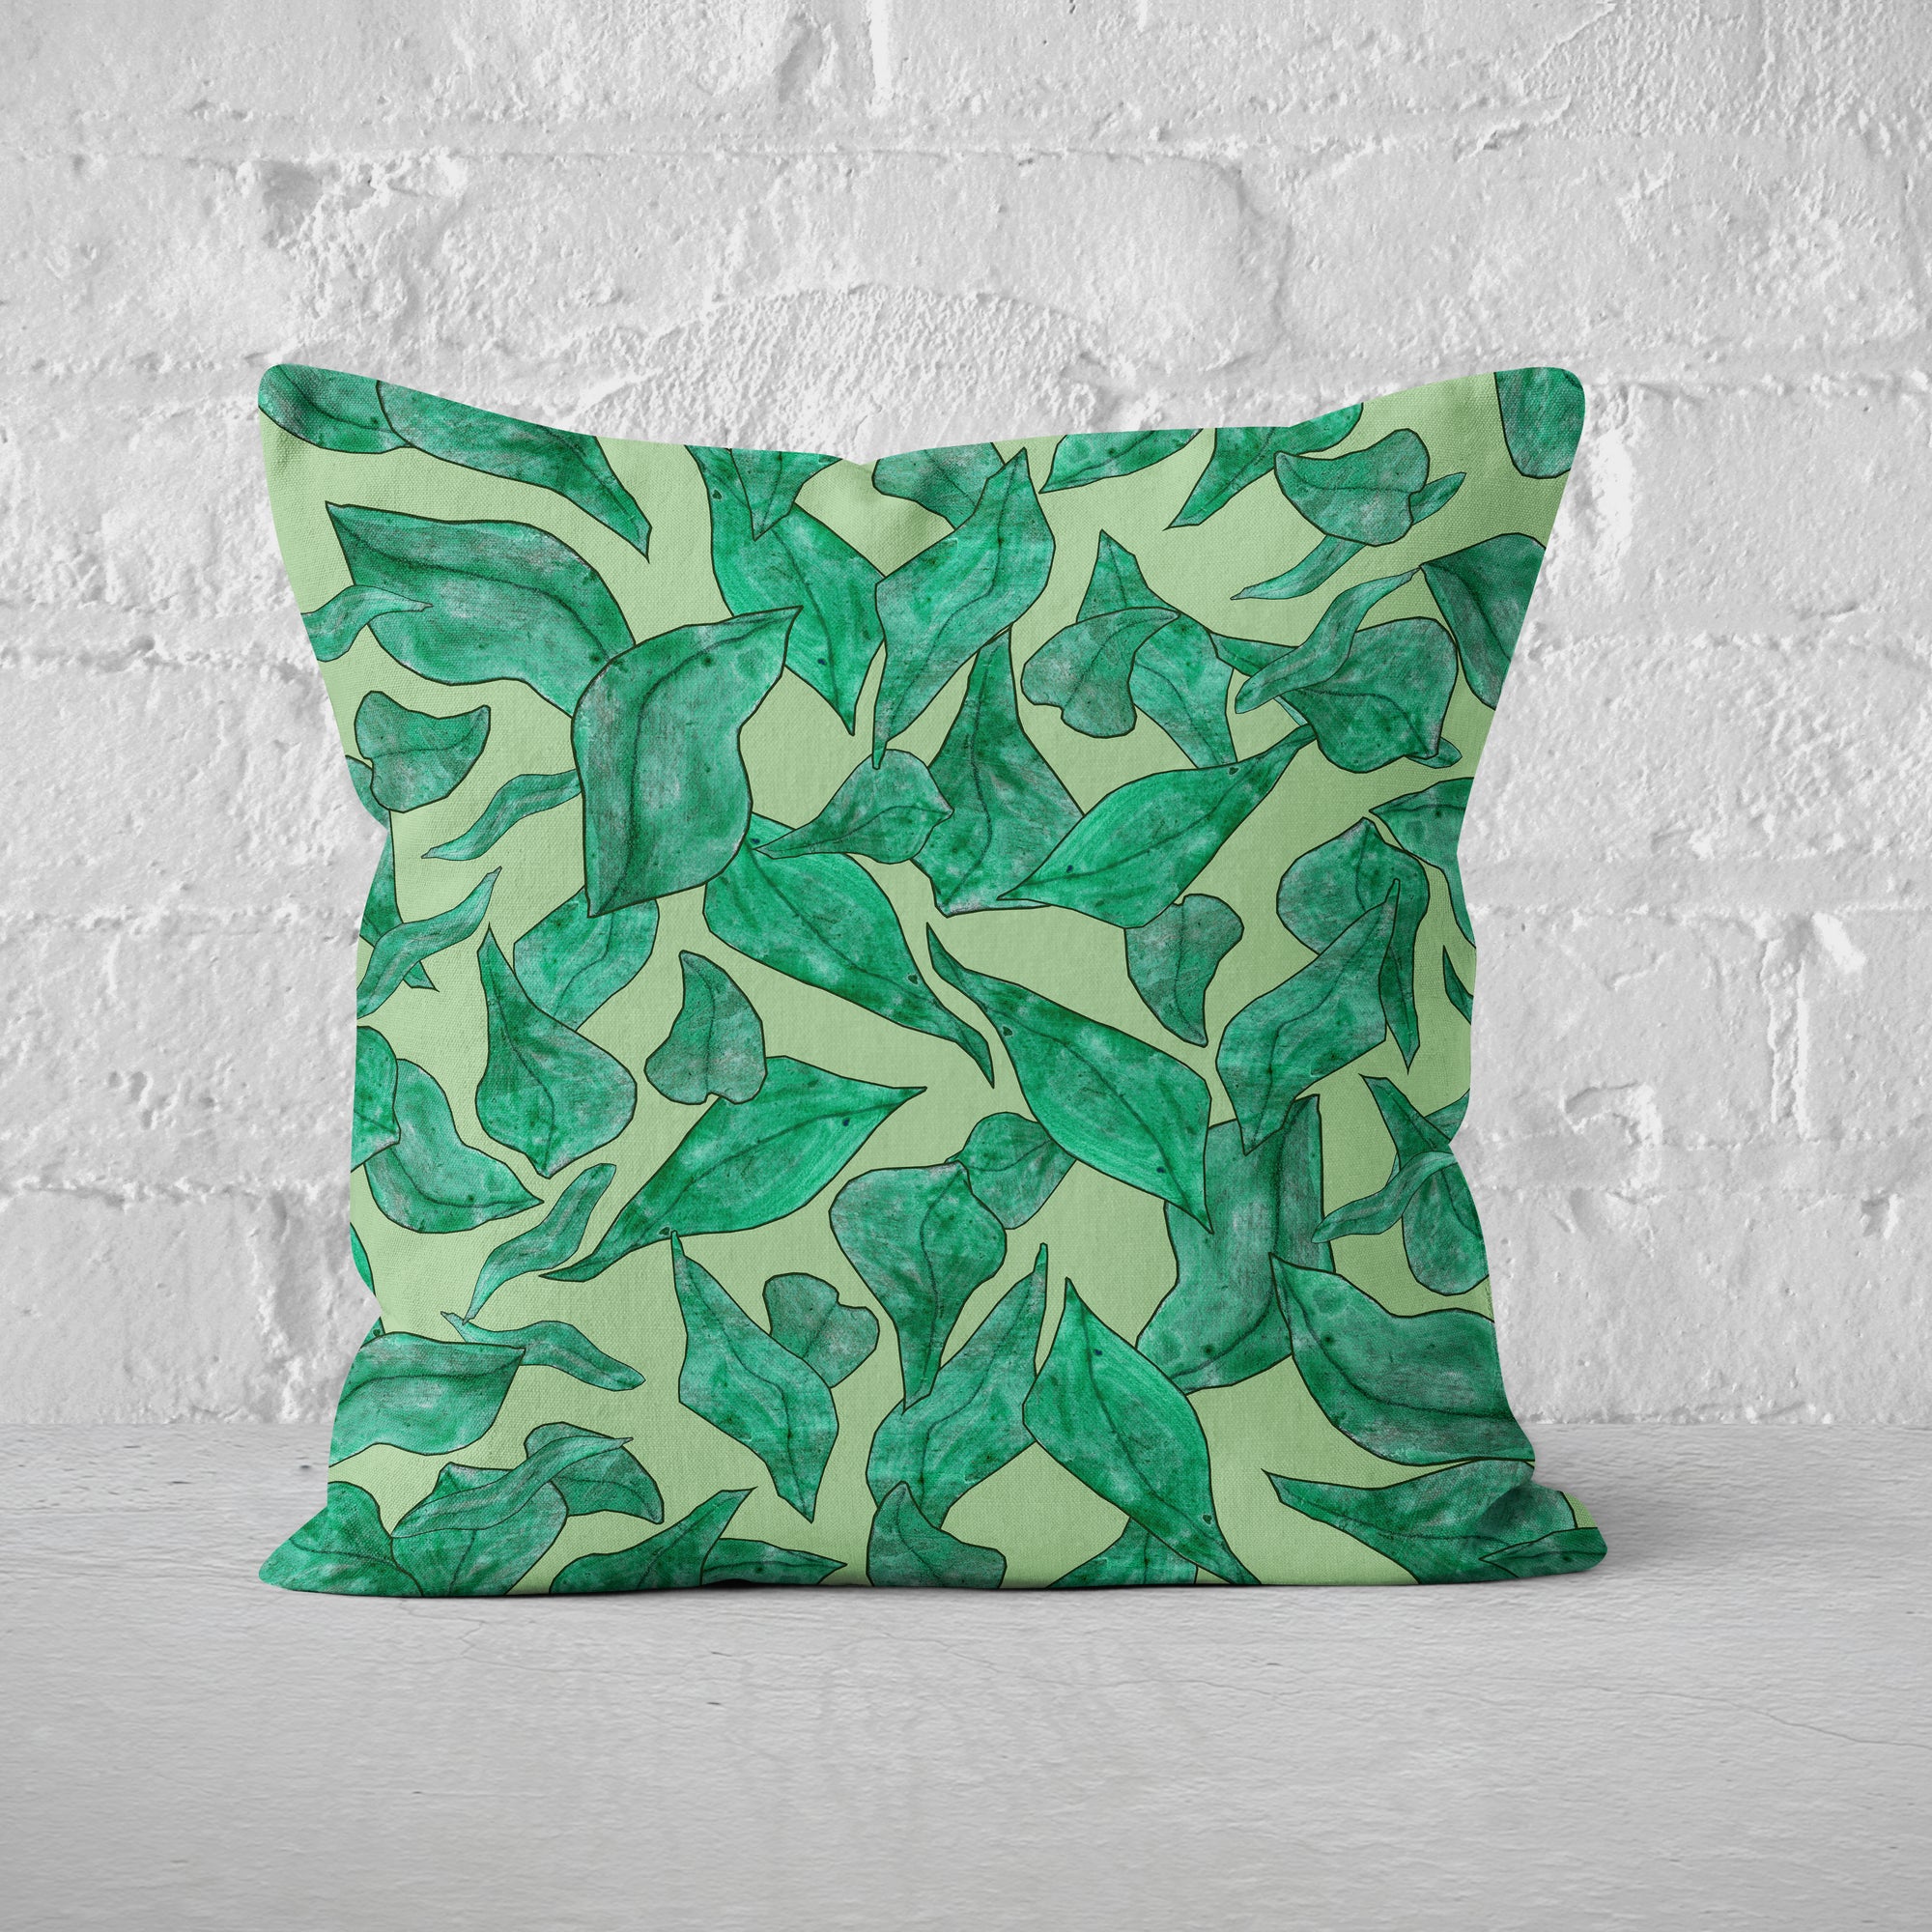 Pillow Cover Feature Art 'Fall 2' - Green - Cotton Twill